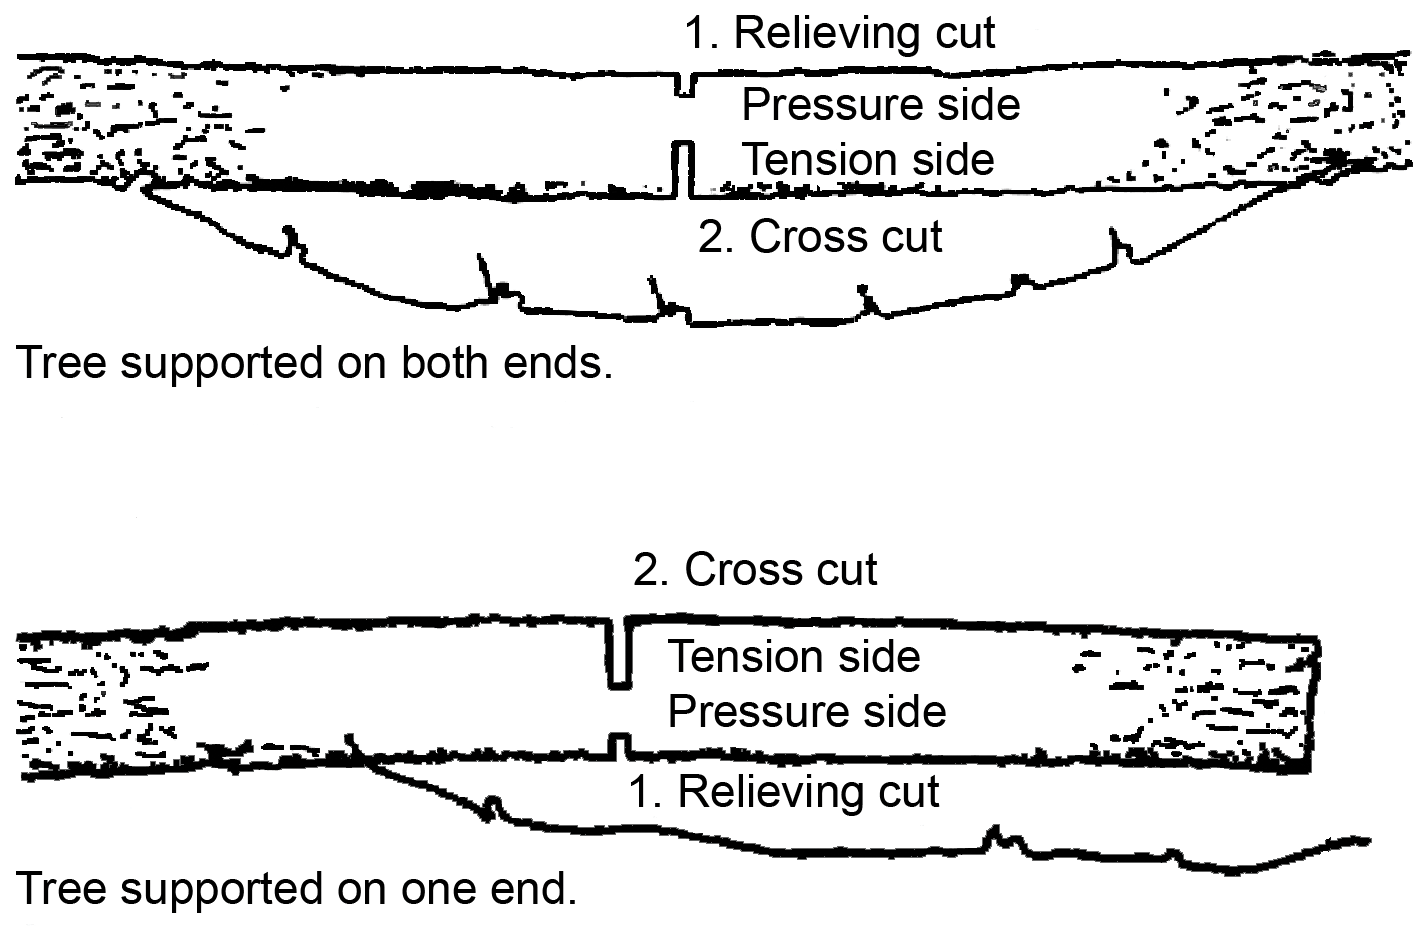 Diagram showing cuts to avoid pinching saw when bucking trees. If tree is supported on both ends, first cut a relieving cut on top of the log then cross cut from the bottom. If tree is supported on one end, make the relieving cut on the bottom and cross cut on top. The relieving cut goes on the log's pressure side and the cross cut goes on the tension side.